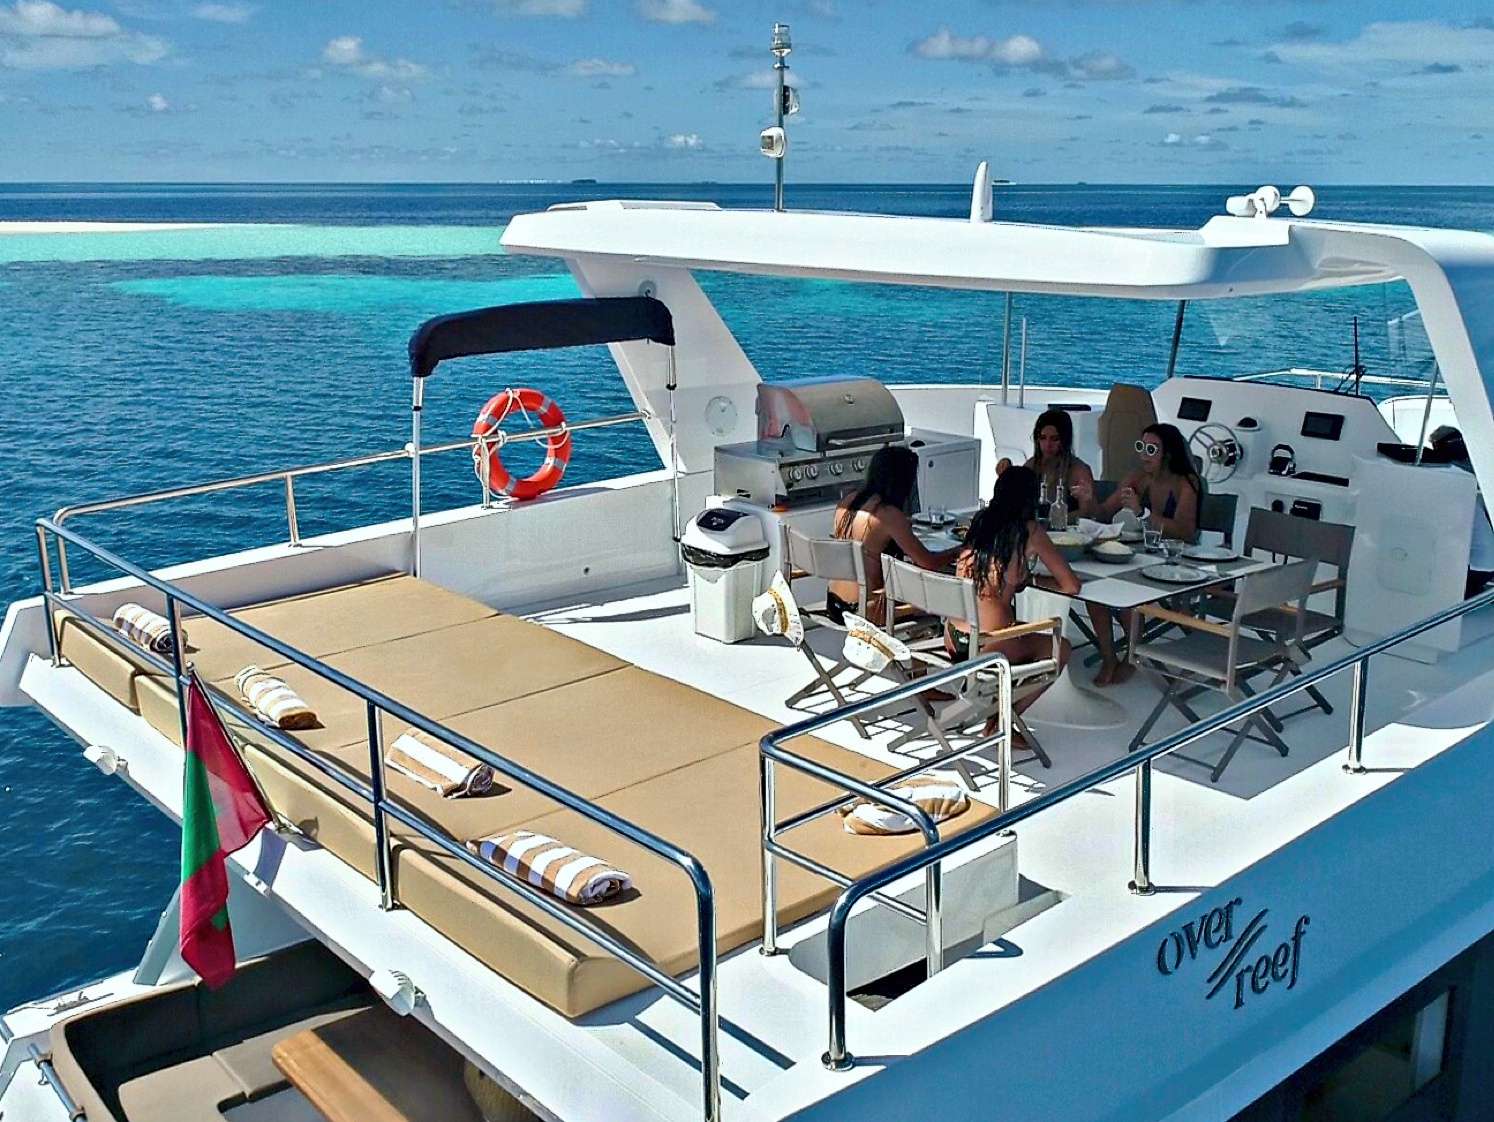 OVER REEF - Luxury yacht charter Maldives & Boat hire in Indian Ocean & SE Asia 5